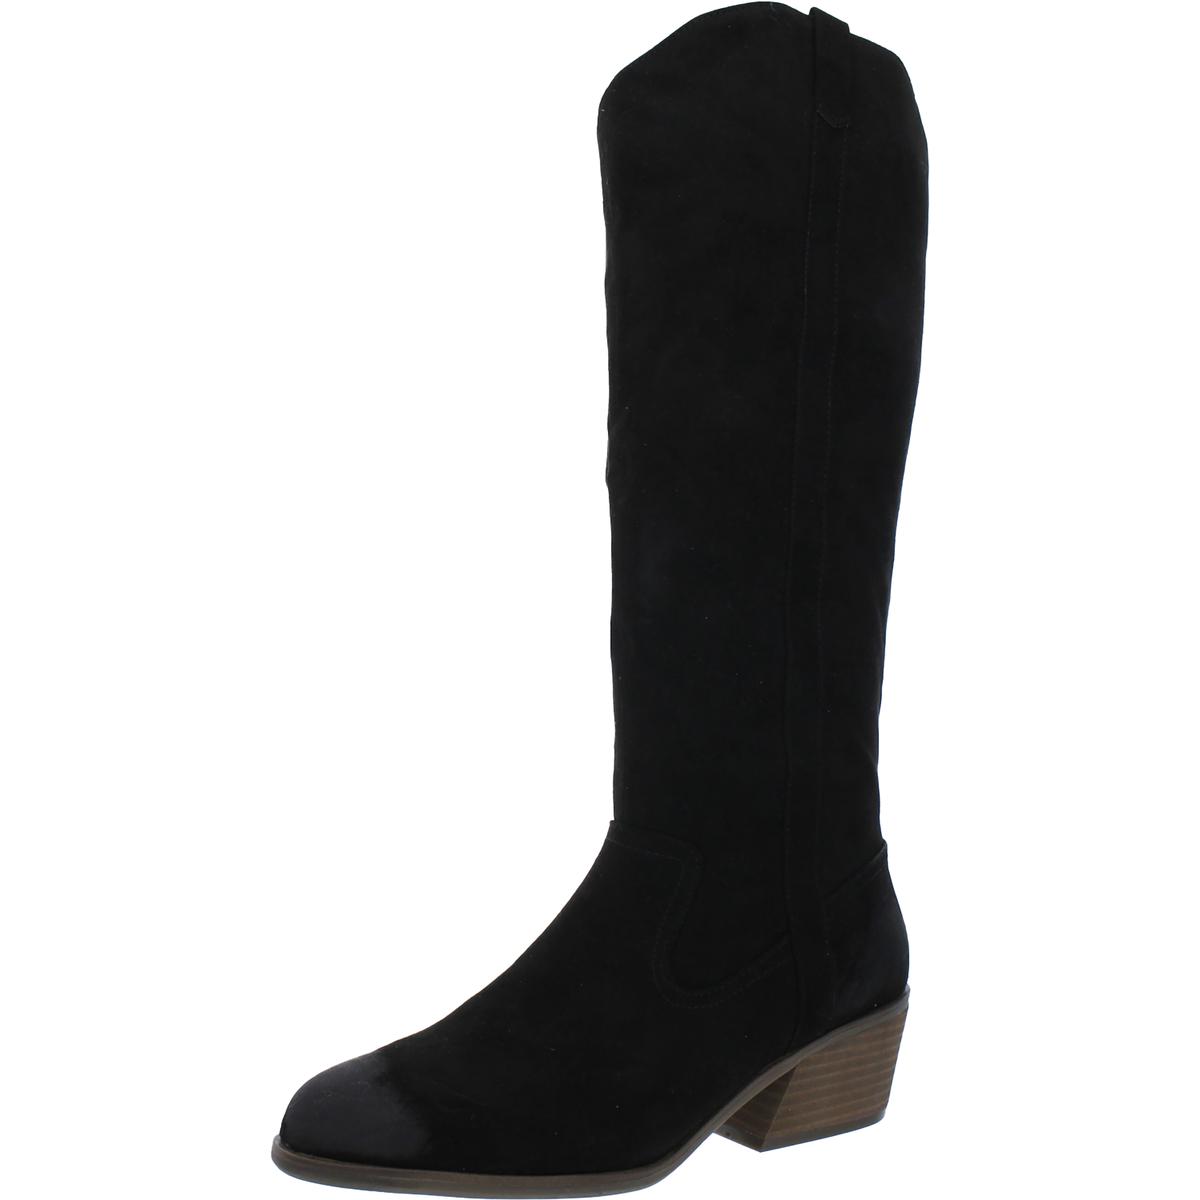 Dr. Scholl's Lovely Womens Faux Suede Tall Knee-High Boots